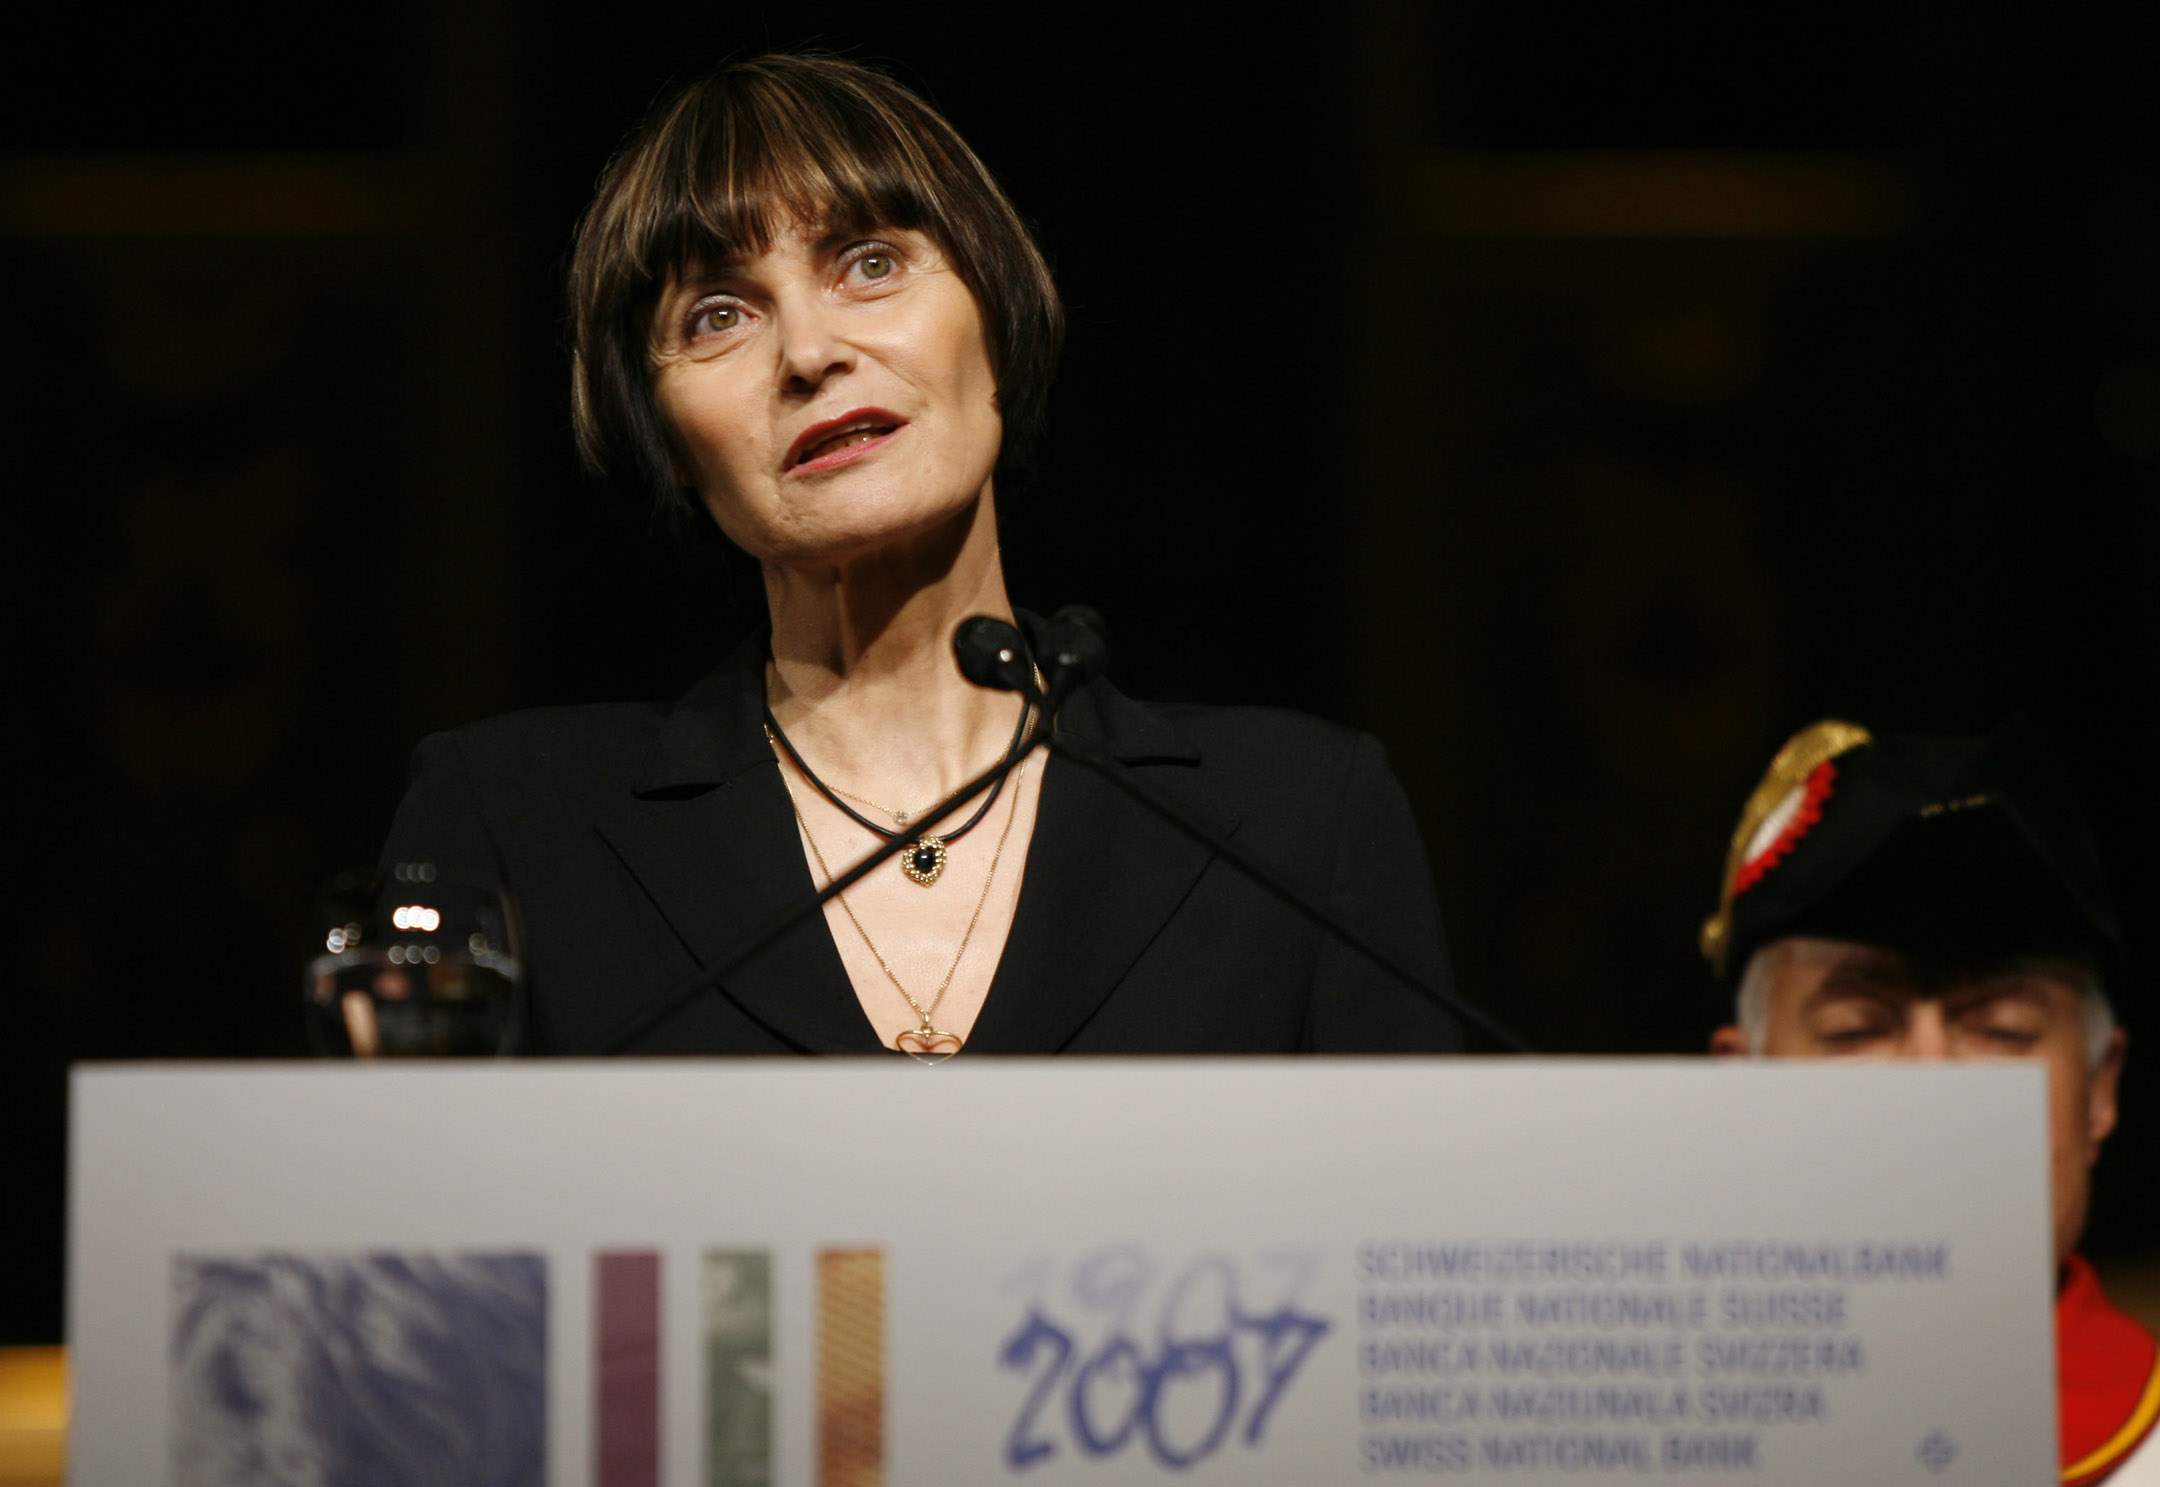 Address by Micheline Calmy-Rey, President of the Swiss Confederation in 2007